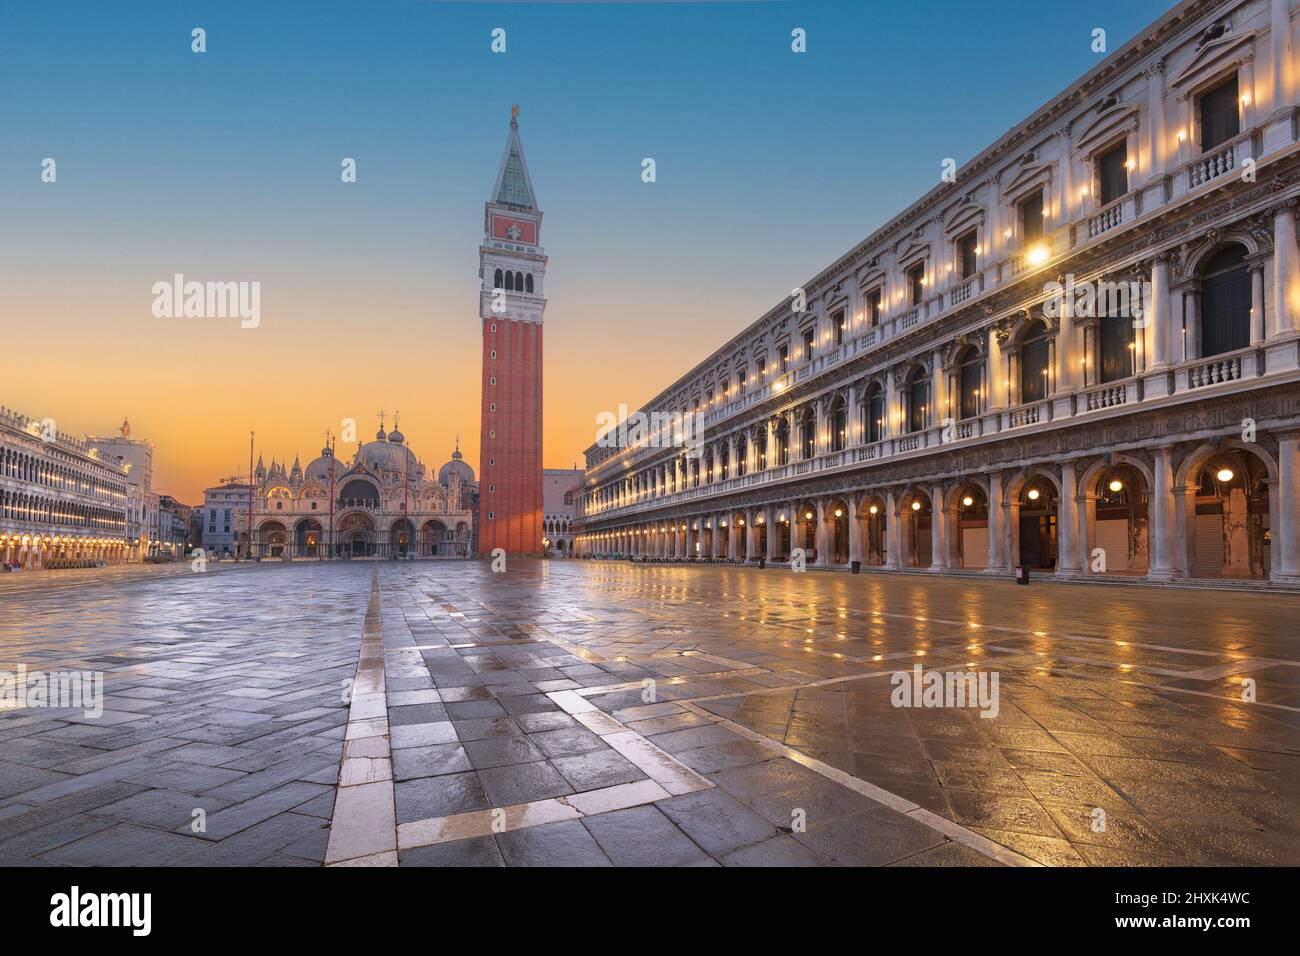 Venice, Italy at St. Mark's Square with the Basilica and Bell Tower at twilight. Stock Photo